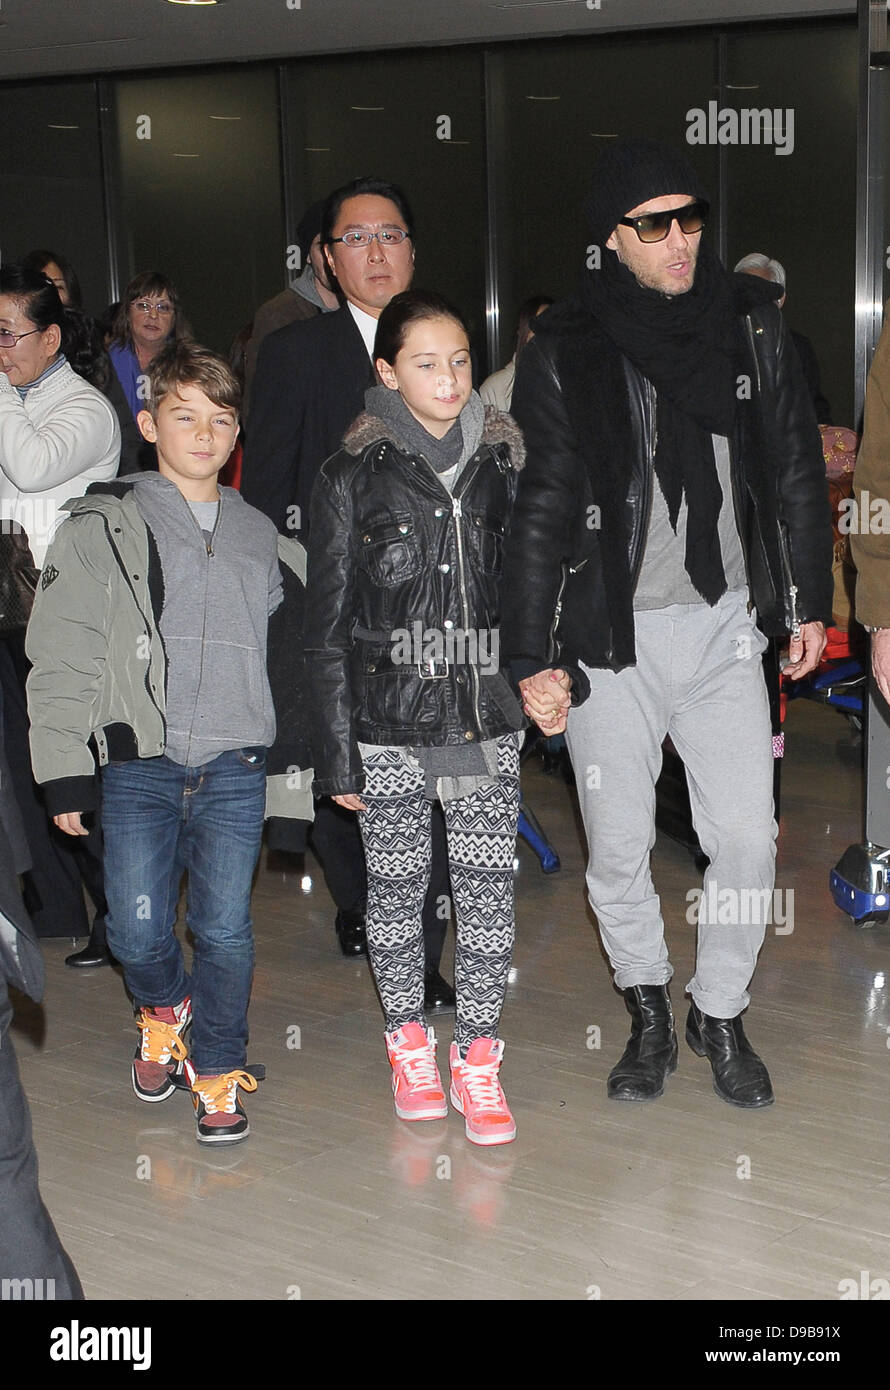 Jude Law and his children Iris and Rudy arrive at Narita International Airport to promote his new film 'Sherlock Holmes: A Game of Shadows' Tokyo, Japan - 13.02.12 Stock Photo